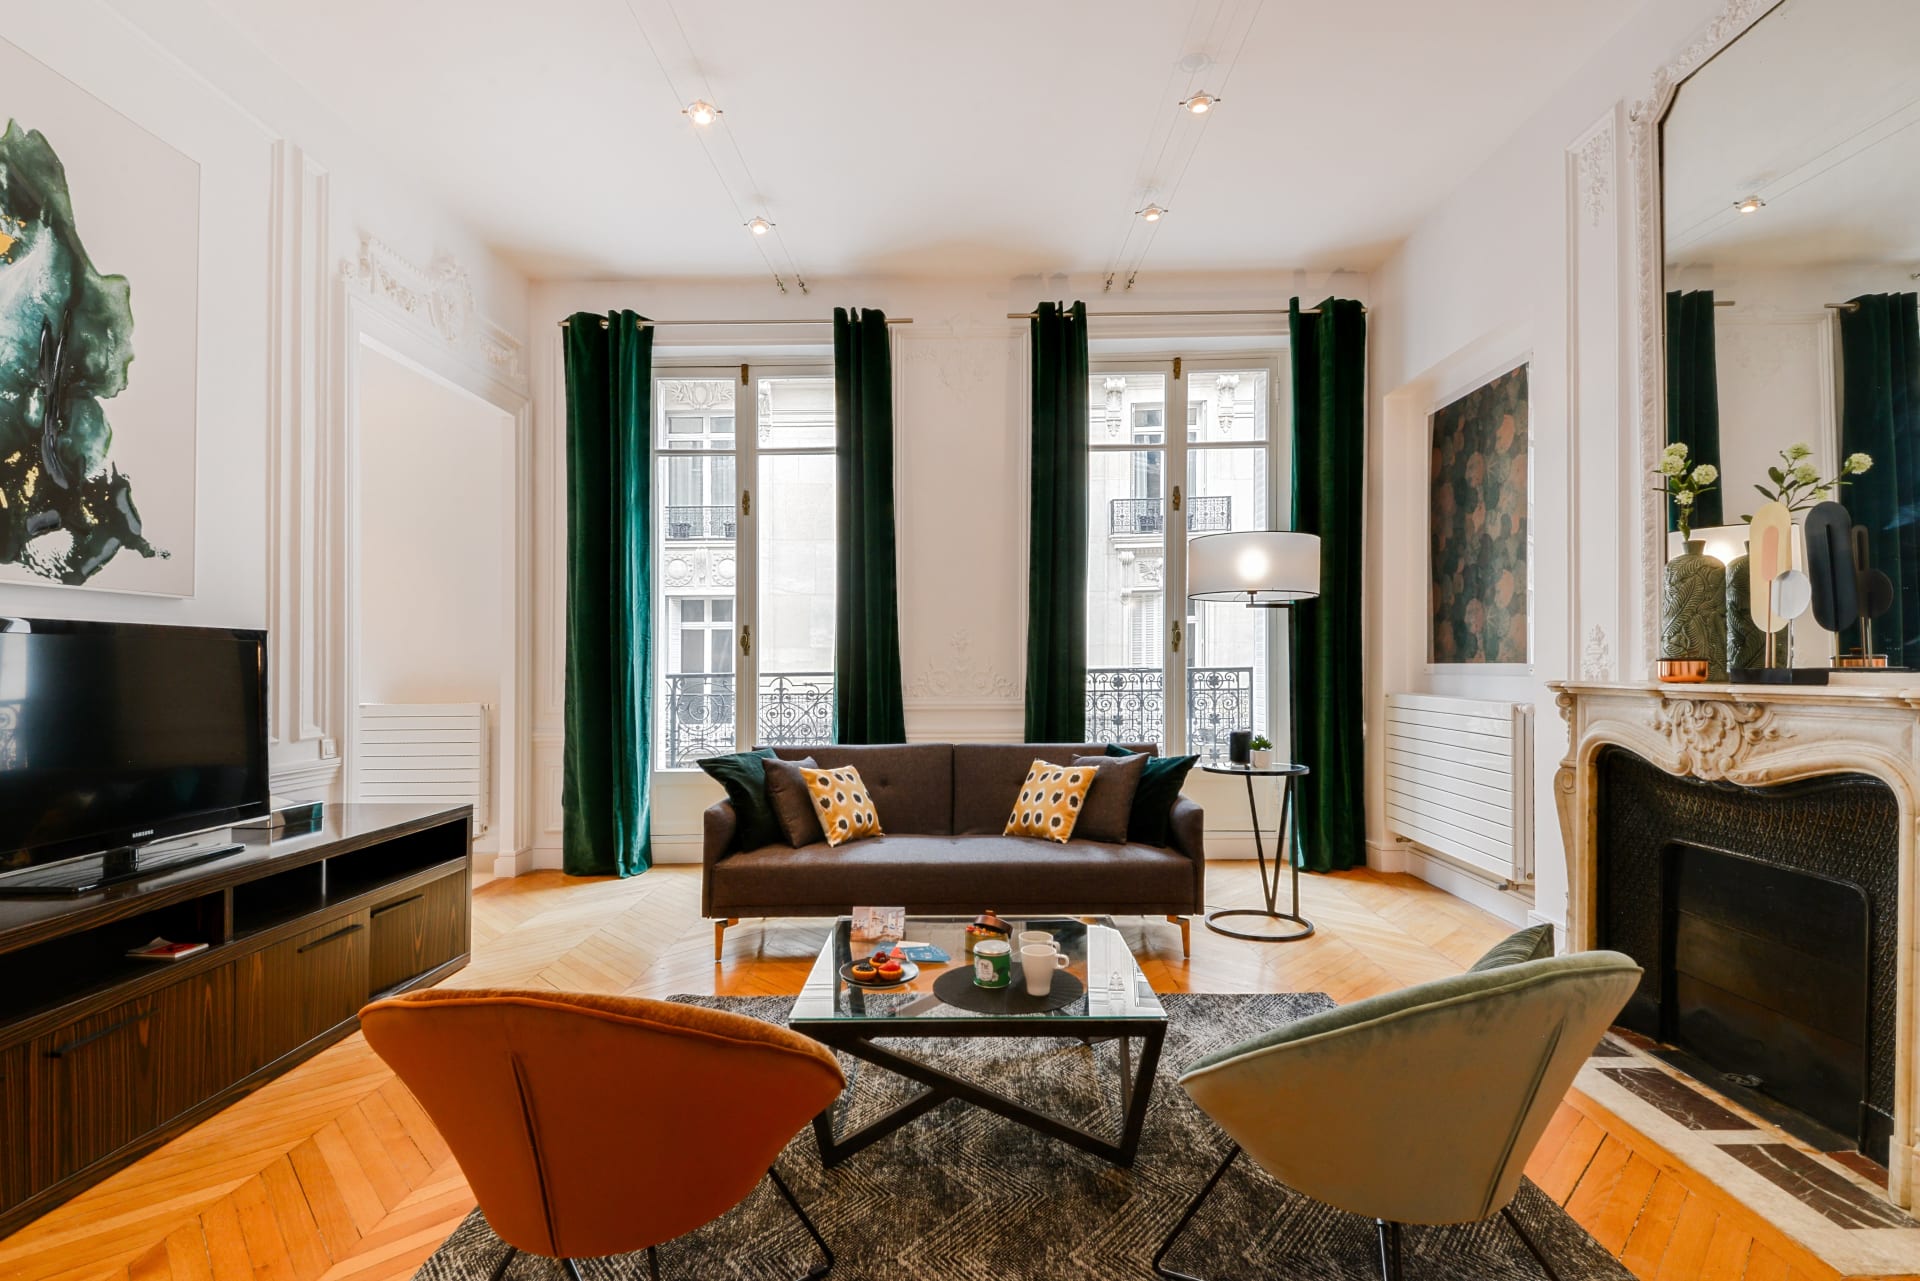 Property Image 2 - Stylish one-bedroom apartment located in the best part of Paris